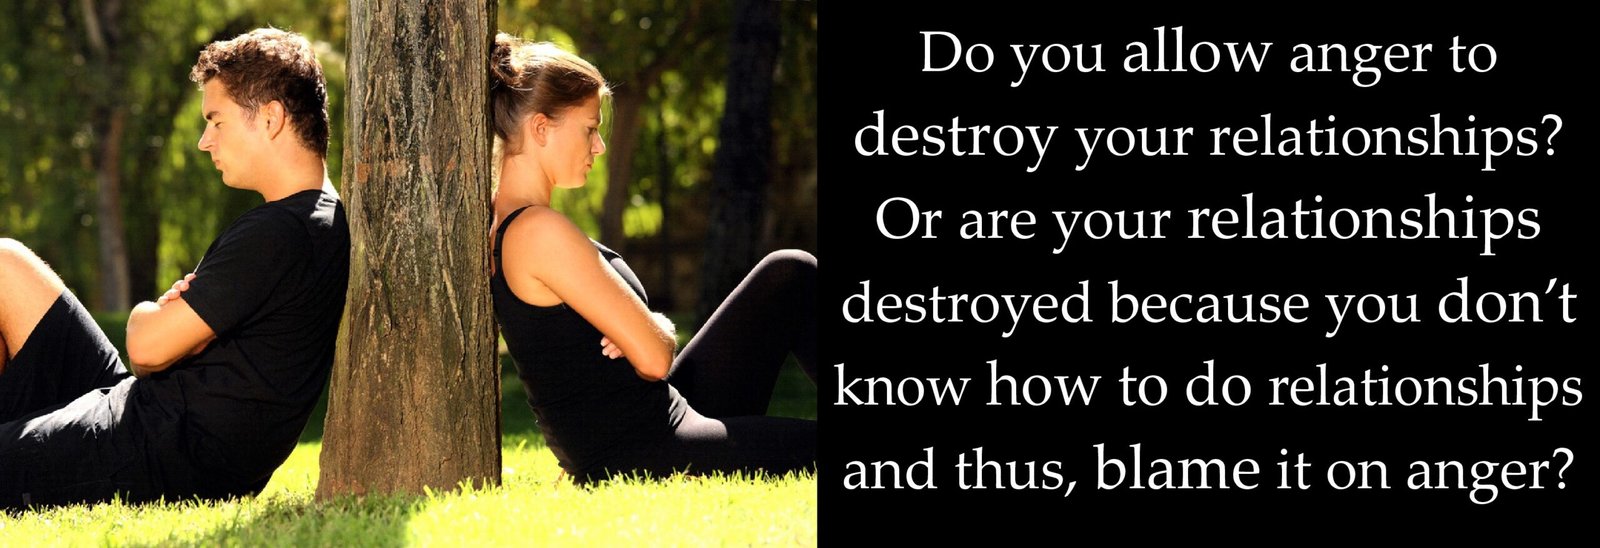 Do you allow anger to destroy your relationships